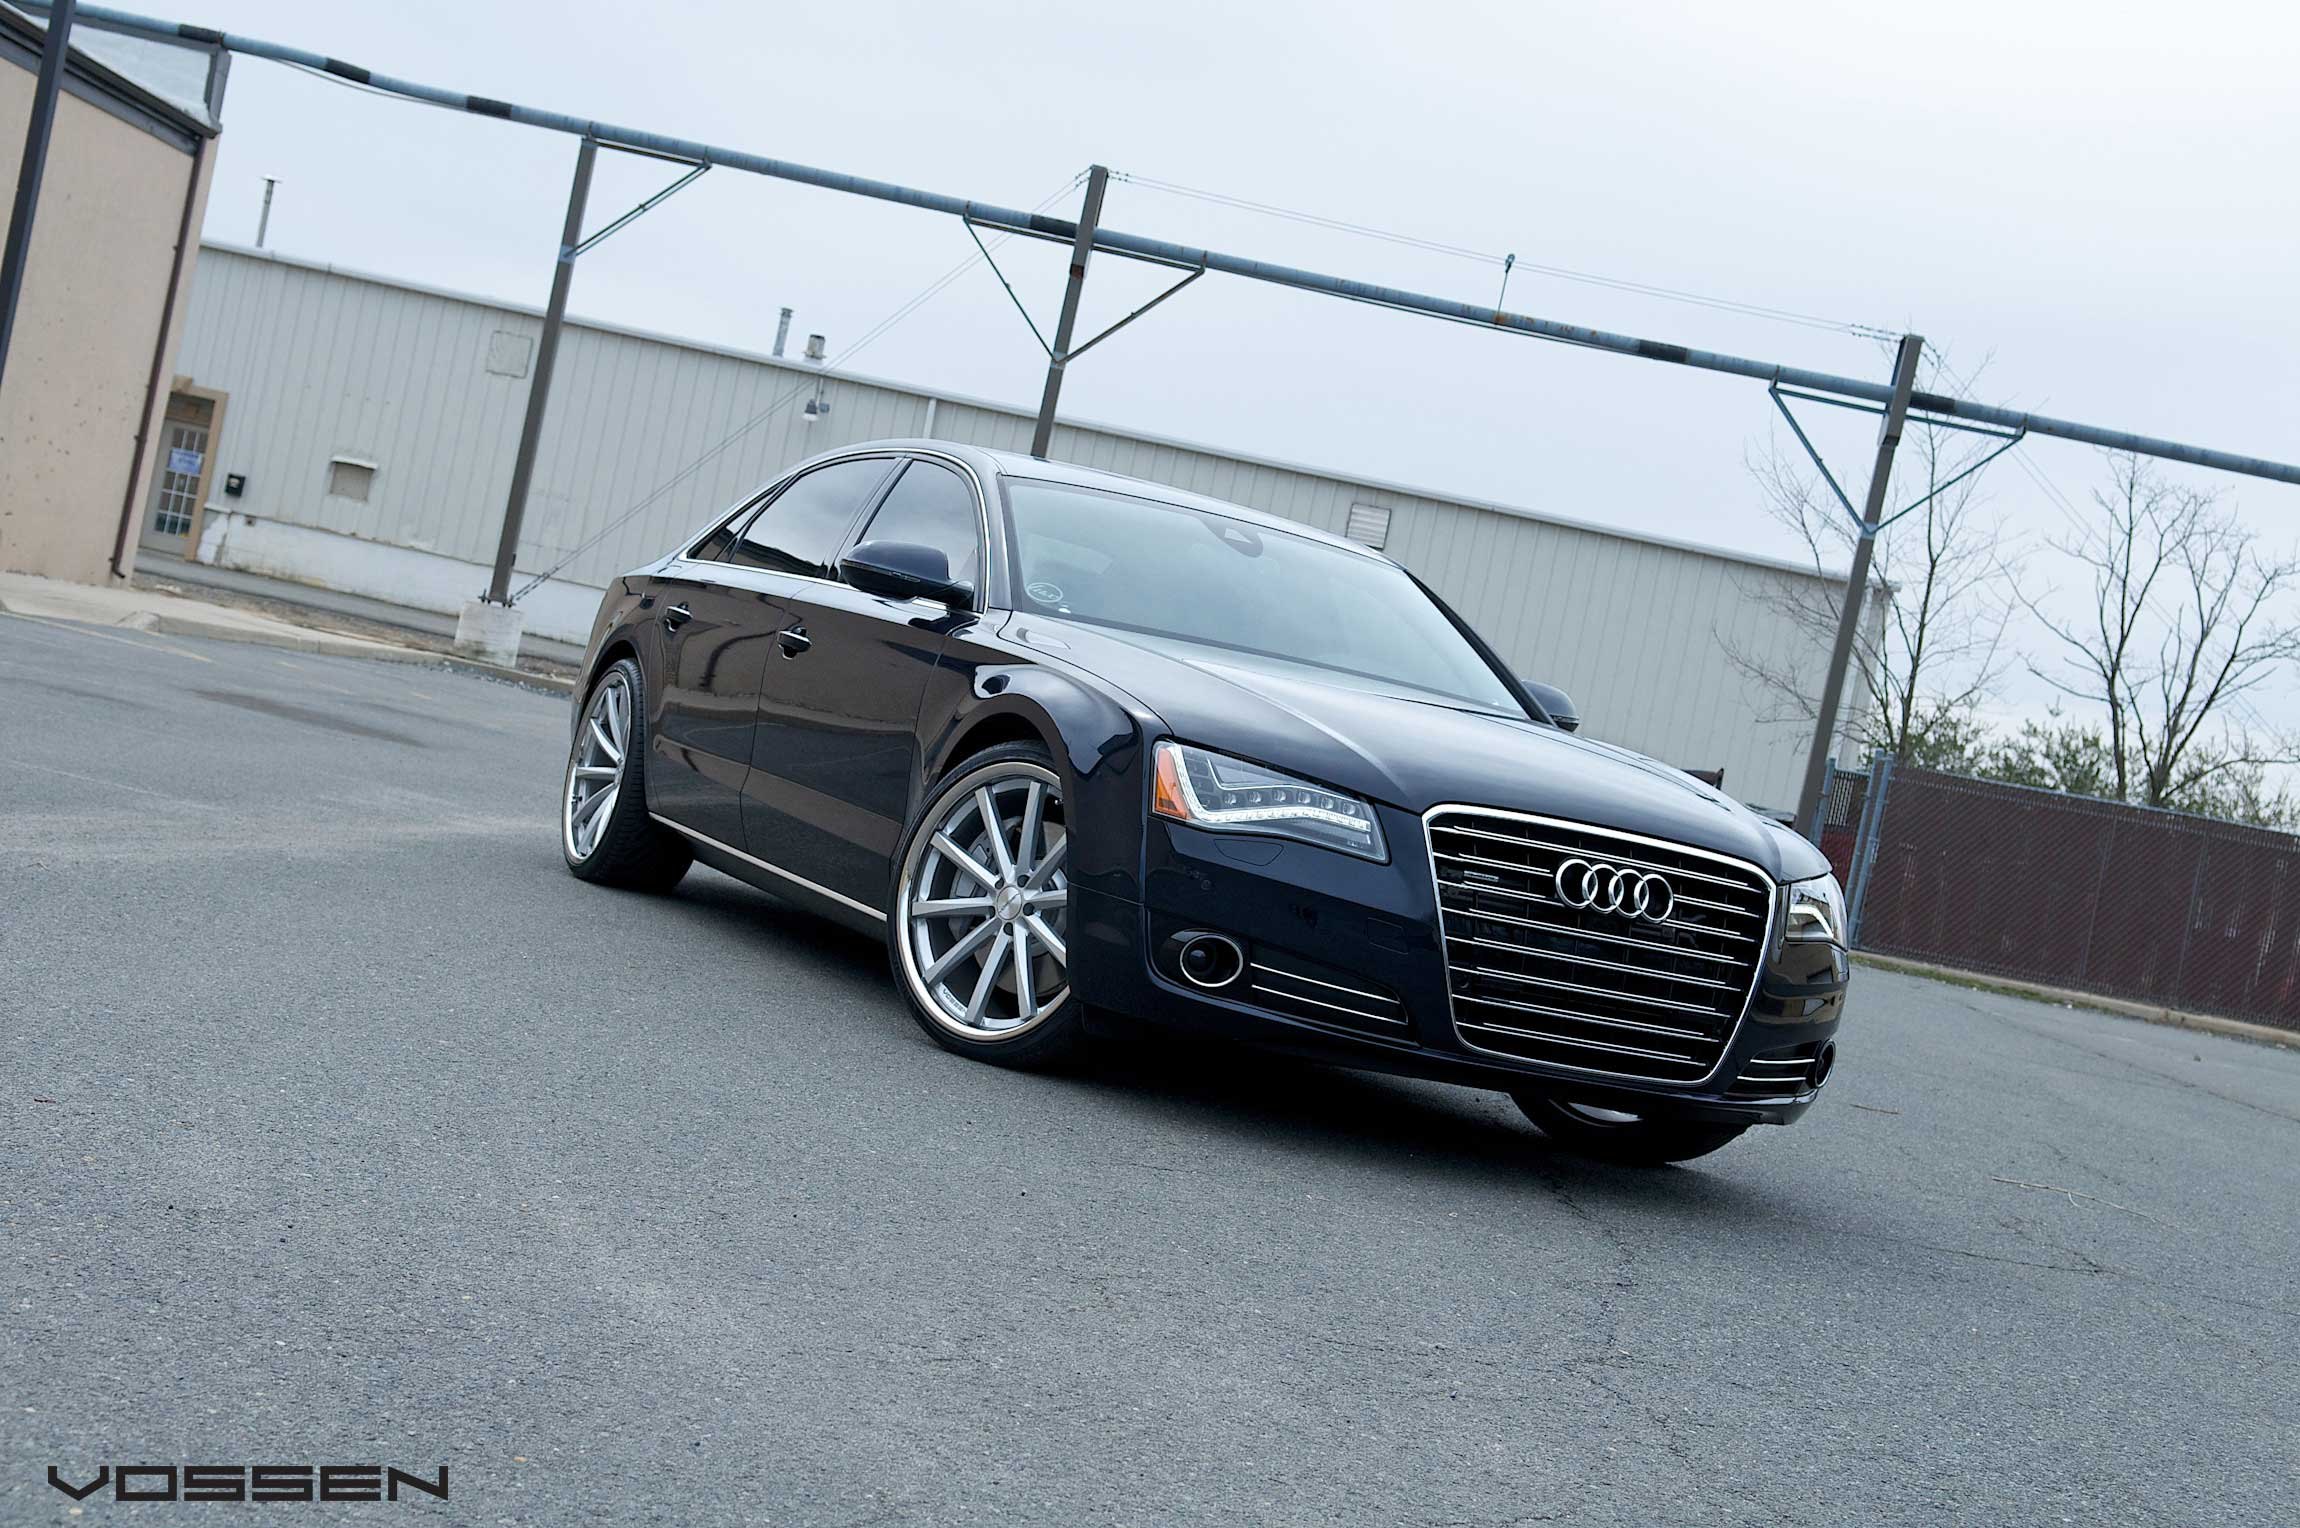 Black Audi A8 with LED-Bar Style Headlights - Photo by Vossen